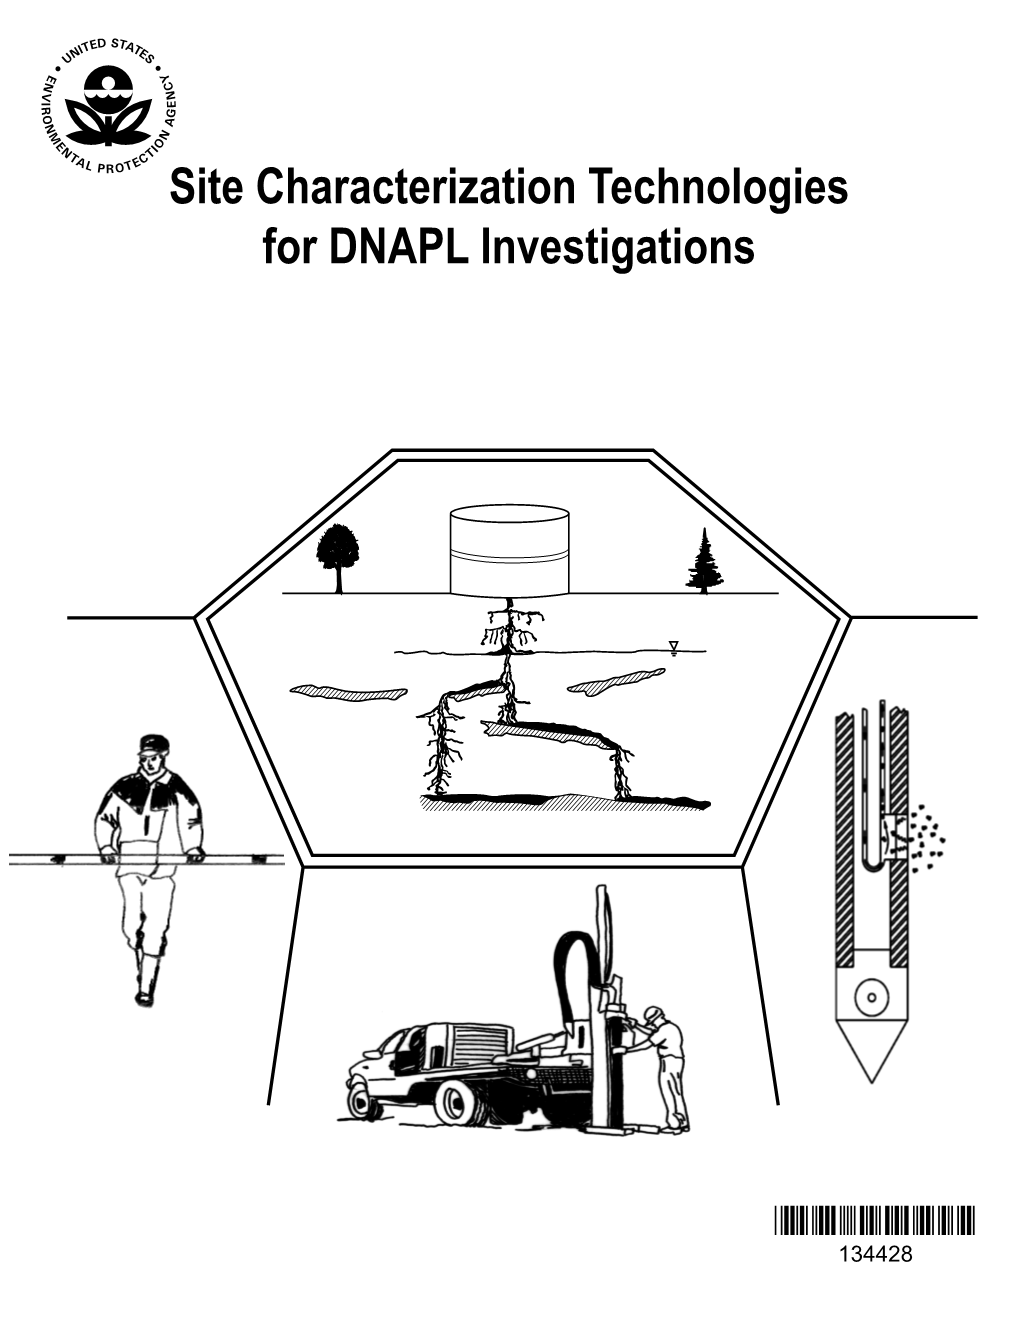 Site Characterization Technologies for DNAPL Investigations